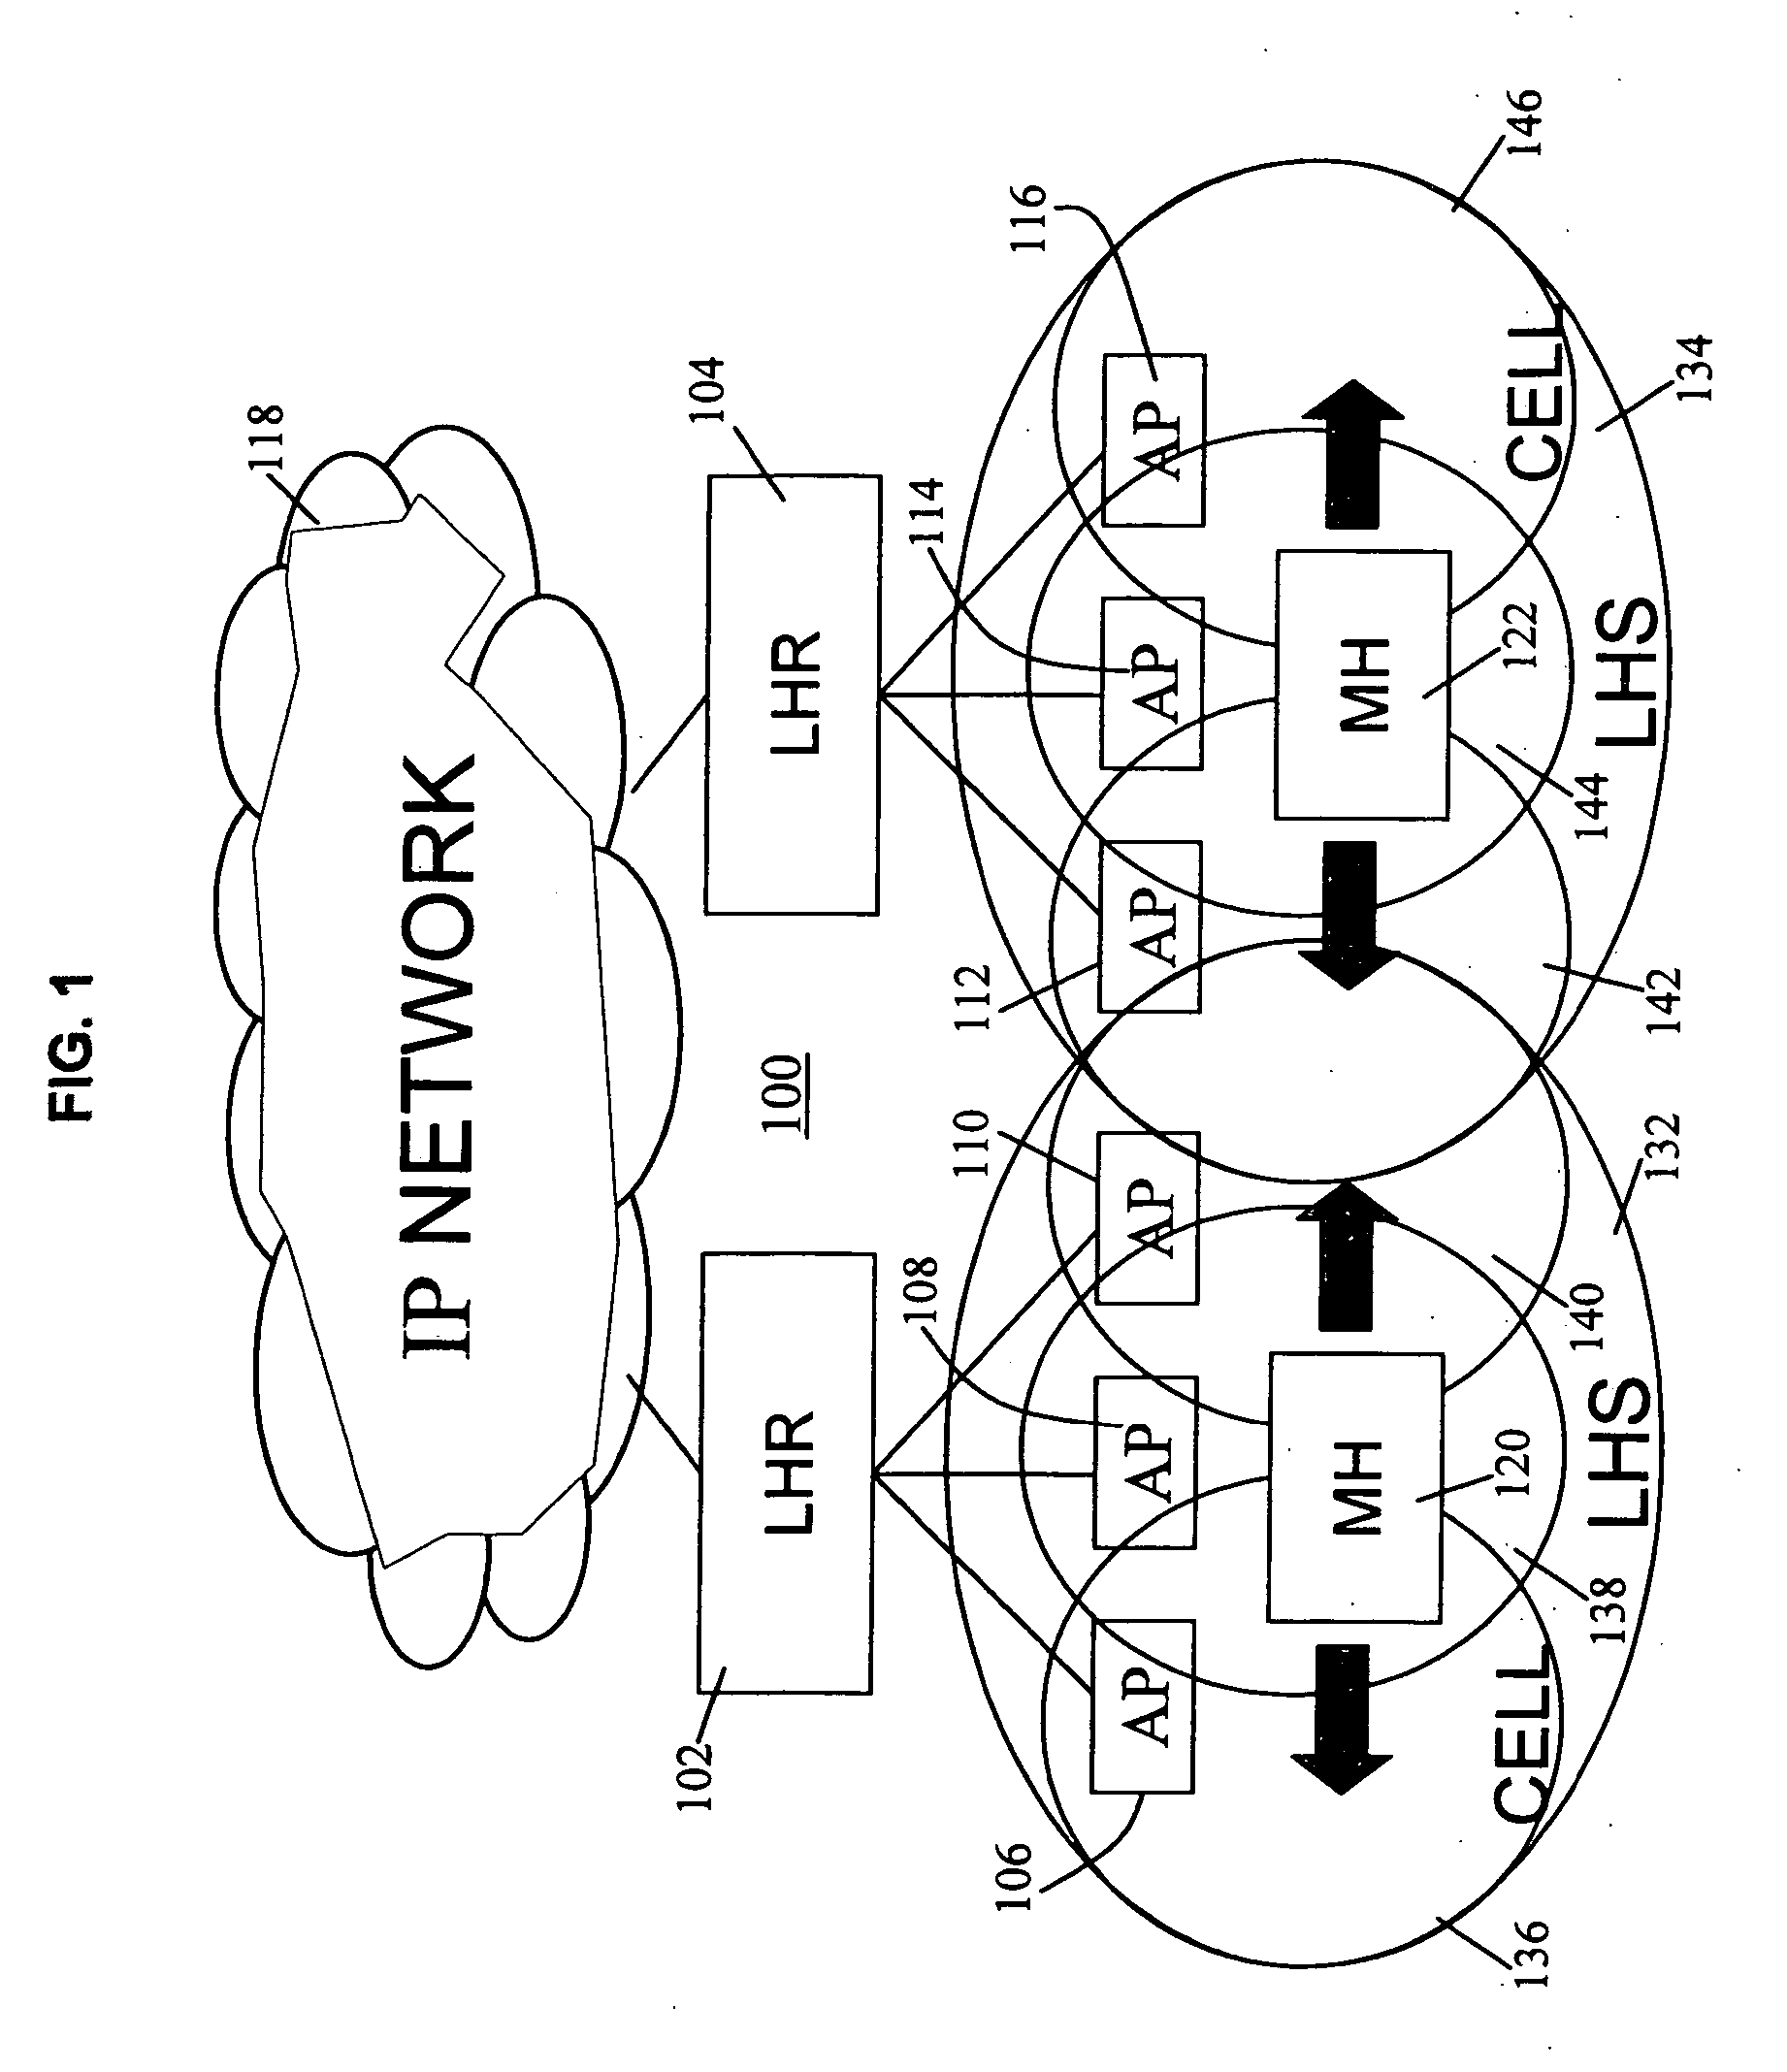 Method and associated apparatus for distributed dynamic paging area clustering under heterogeneous access networks